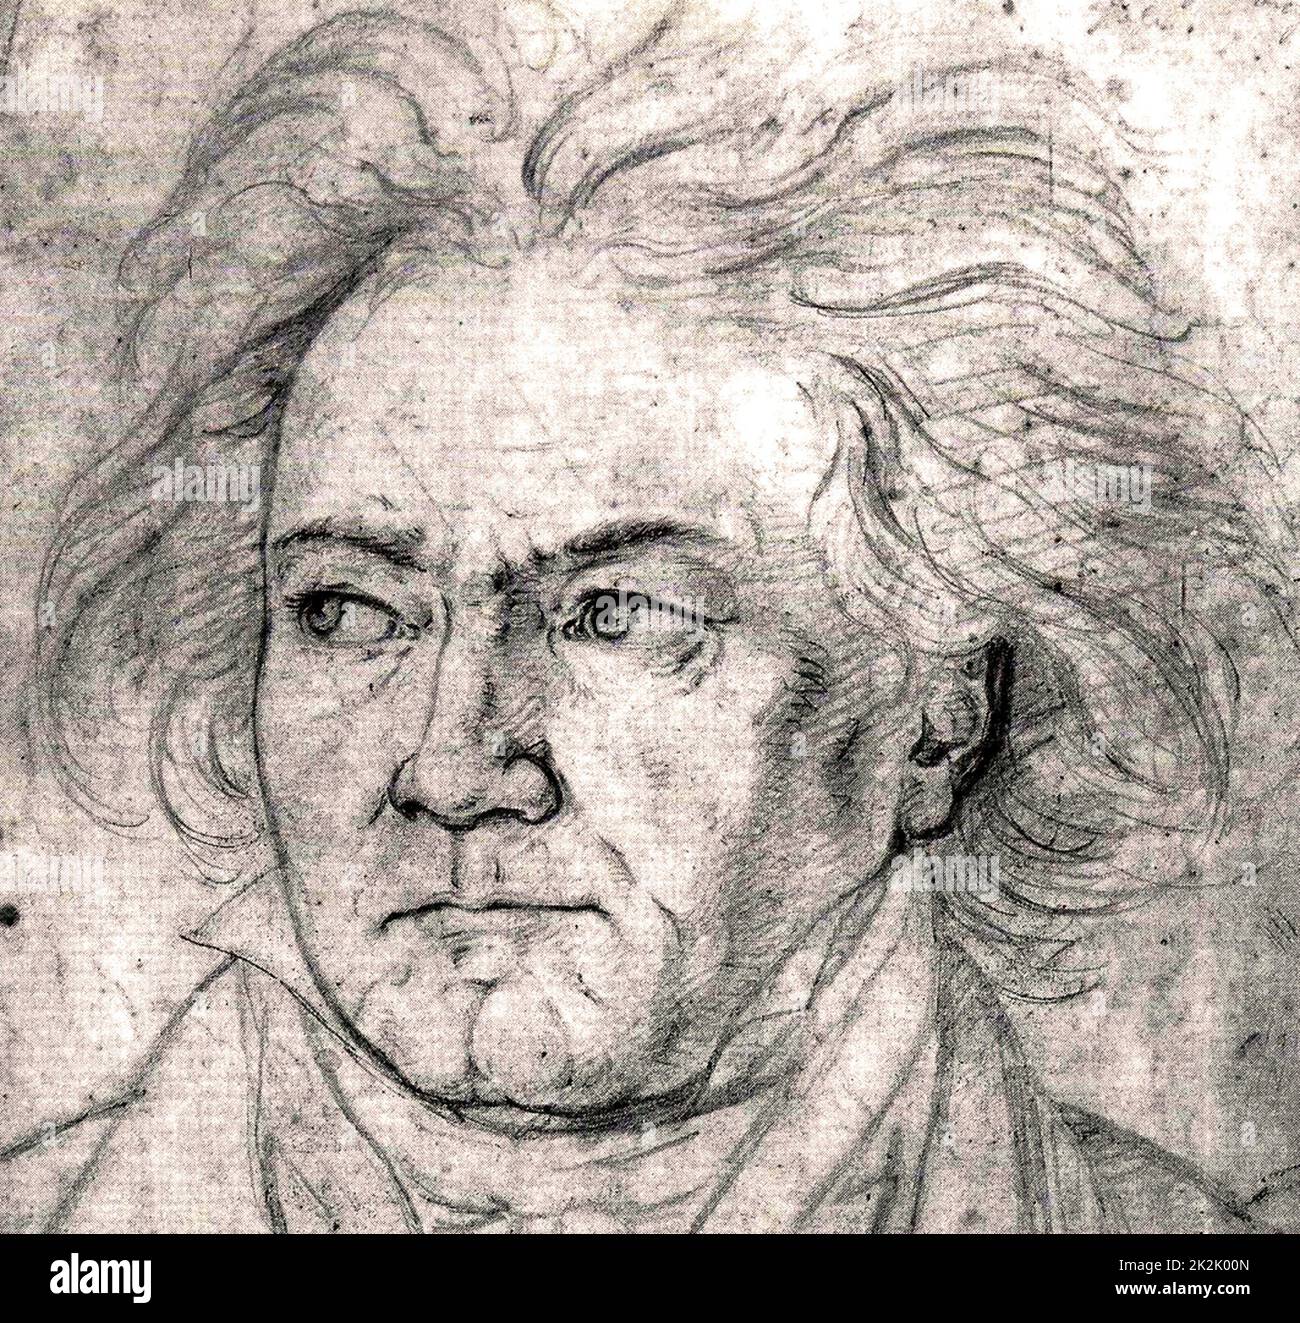 Ludwig van Beethoven (16 December 1770- 26 March 1827) was a German composer and pianist. He was a crucial figure in the transitional period between the Classical and Romantic eras in Western classical music, and remains one of the most acclaimed and influential composers of all time.   Portrait of Beethoven in 1818 by August Klöber Stock Photo